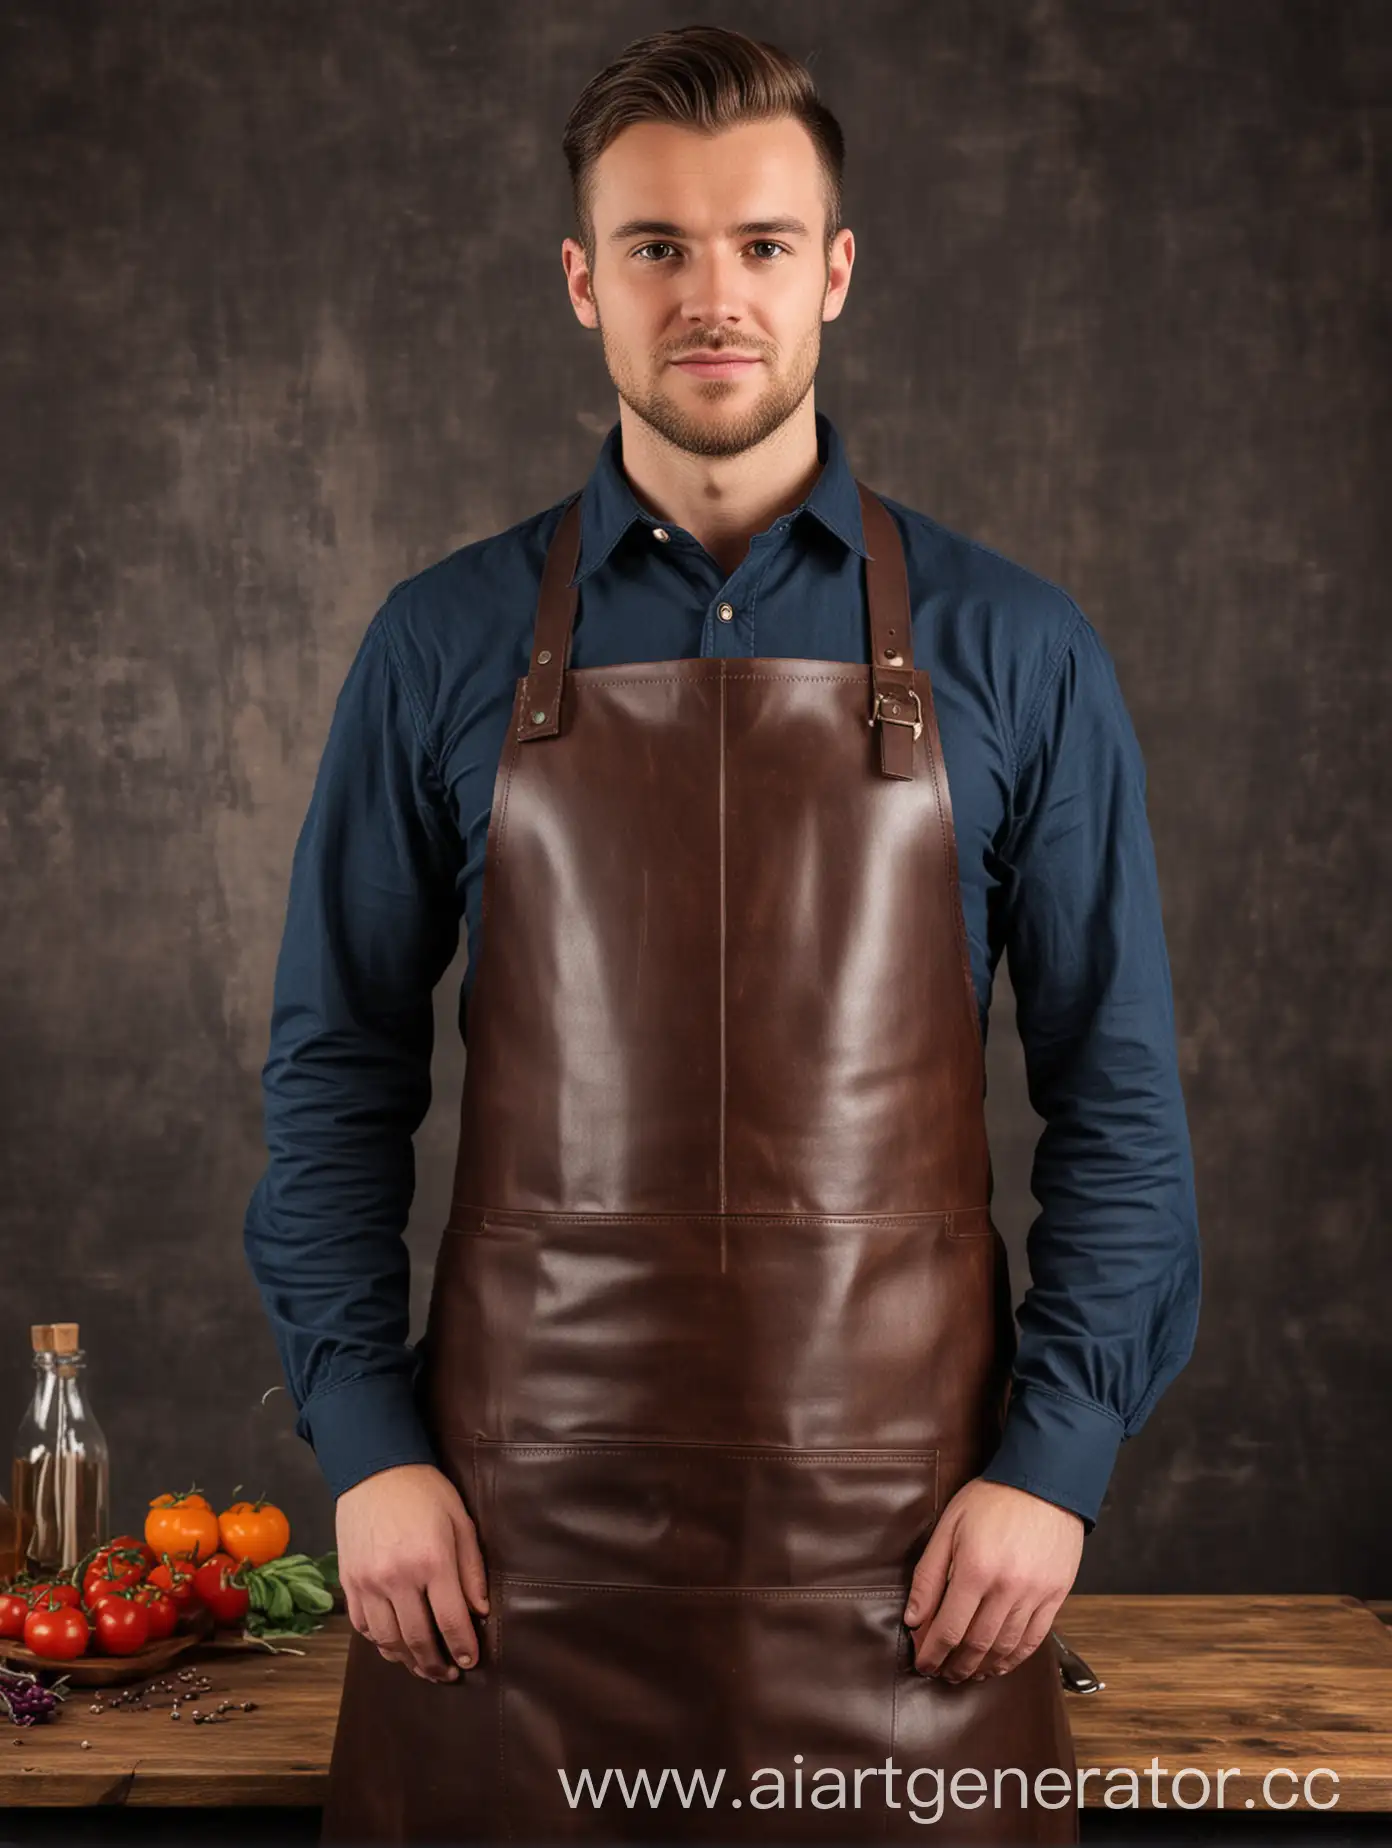 Craftsman-in-Leather-Apron-Working-in-Workshop